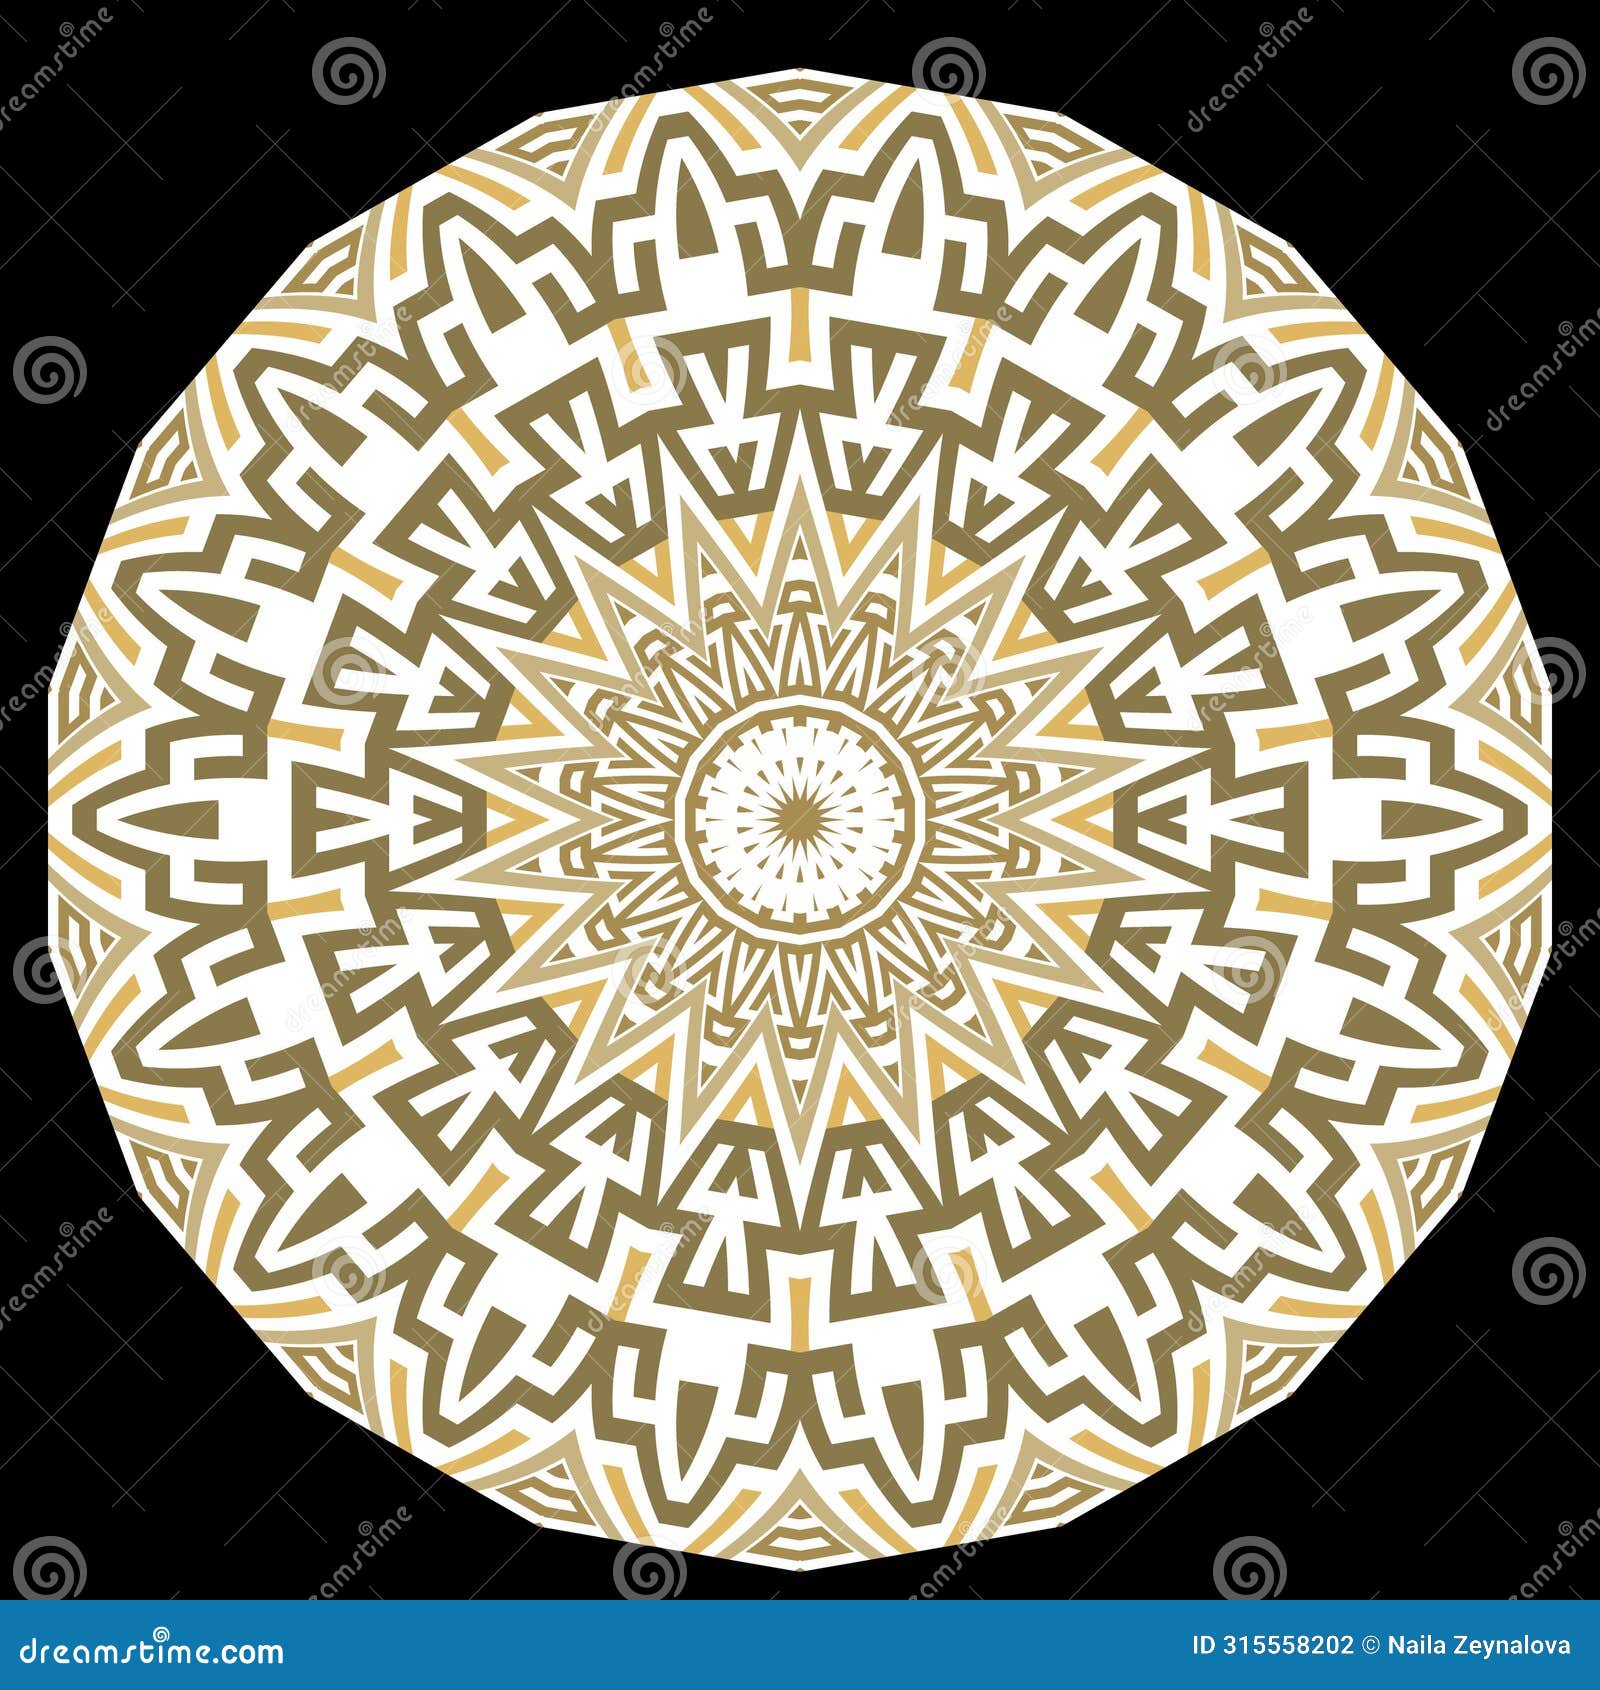 tribal ethnic ornamental circle floral mandala pattern with zigzag lines, abstract flowers, greek key meanders. beautiful round